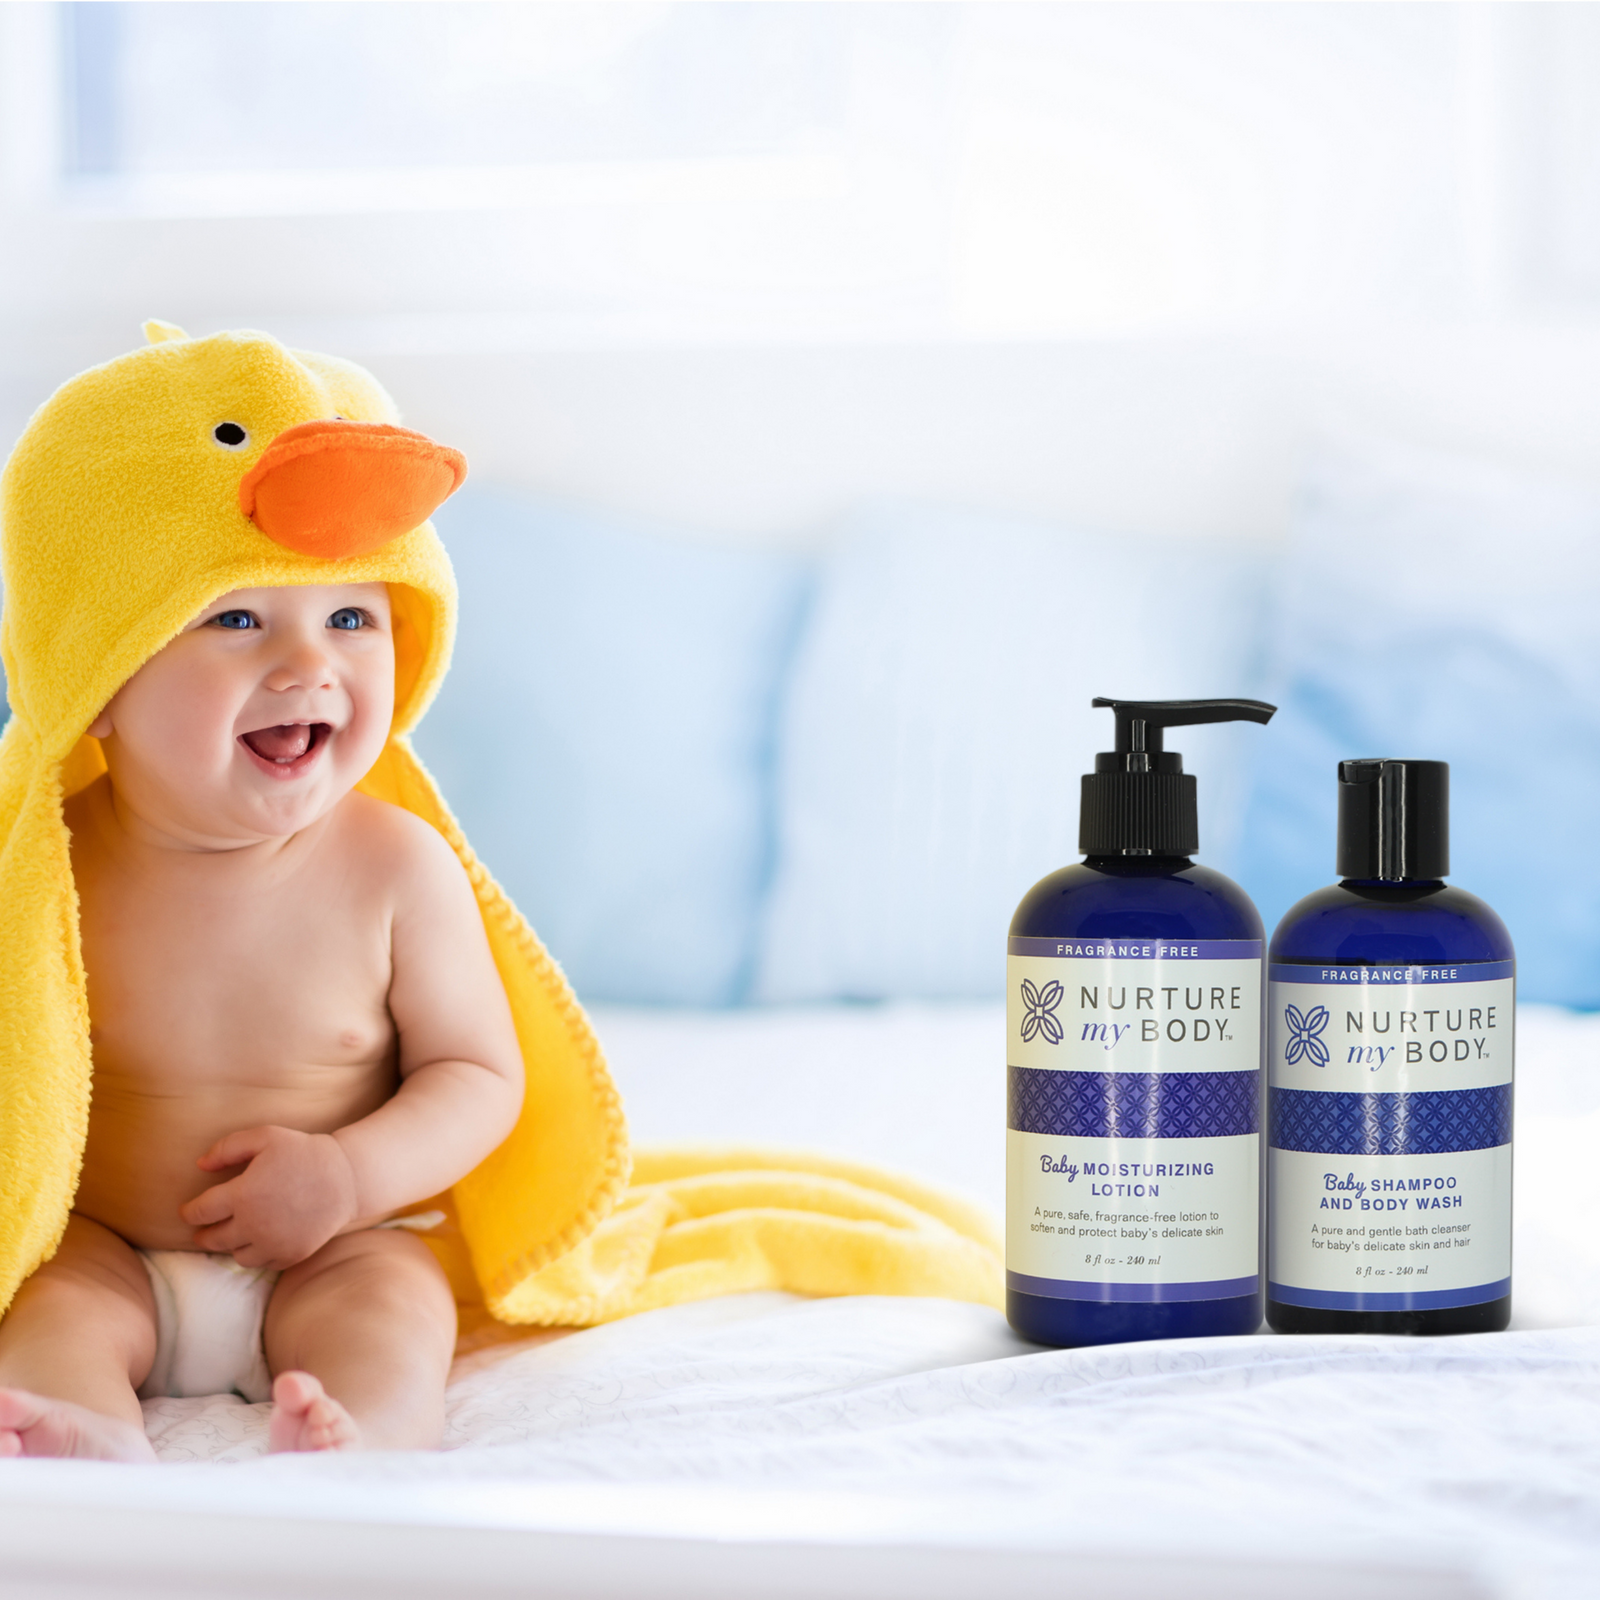 All Natural Baby Moisturizing Lotion, Baby Shampoo and Body Wash Combo with Basics My Body